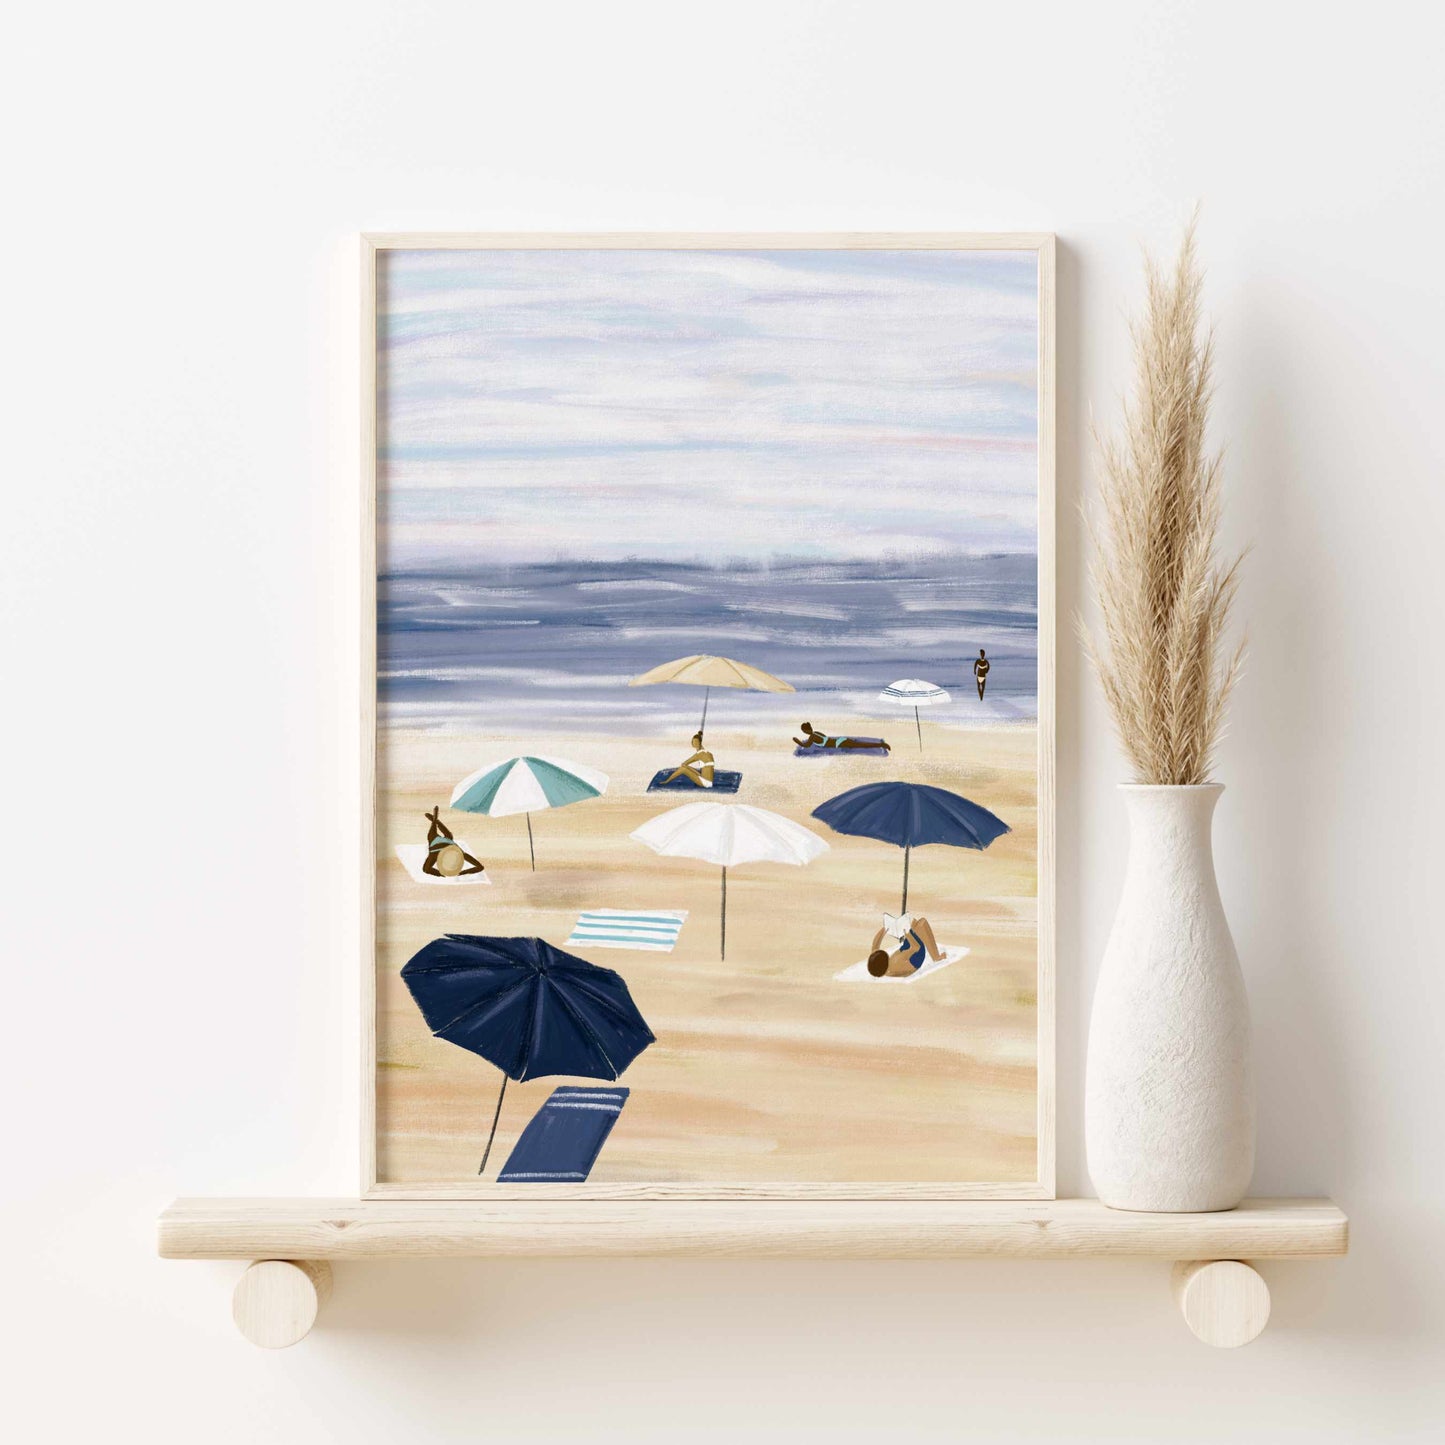 a painting of a beach scene with umbrellas